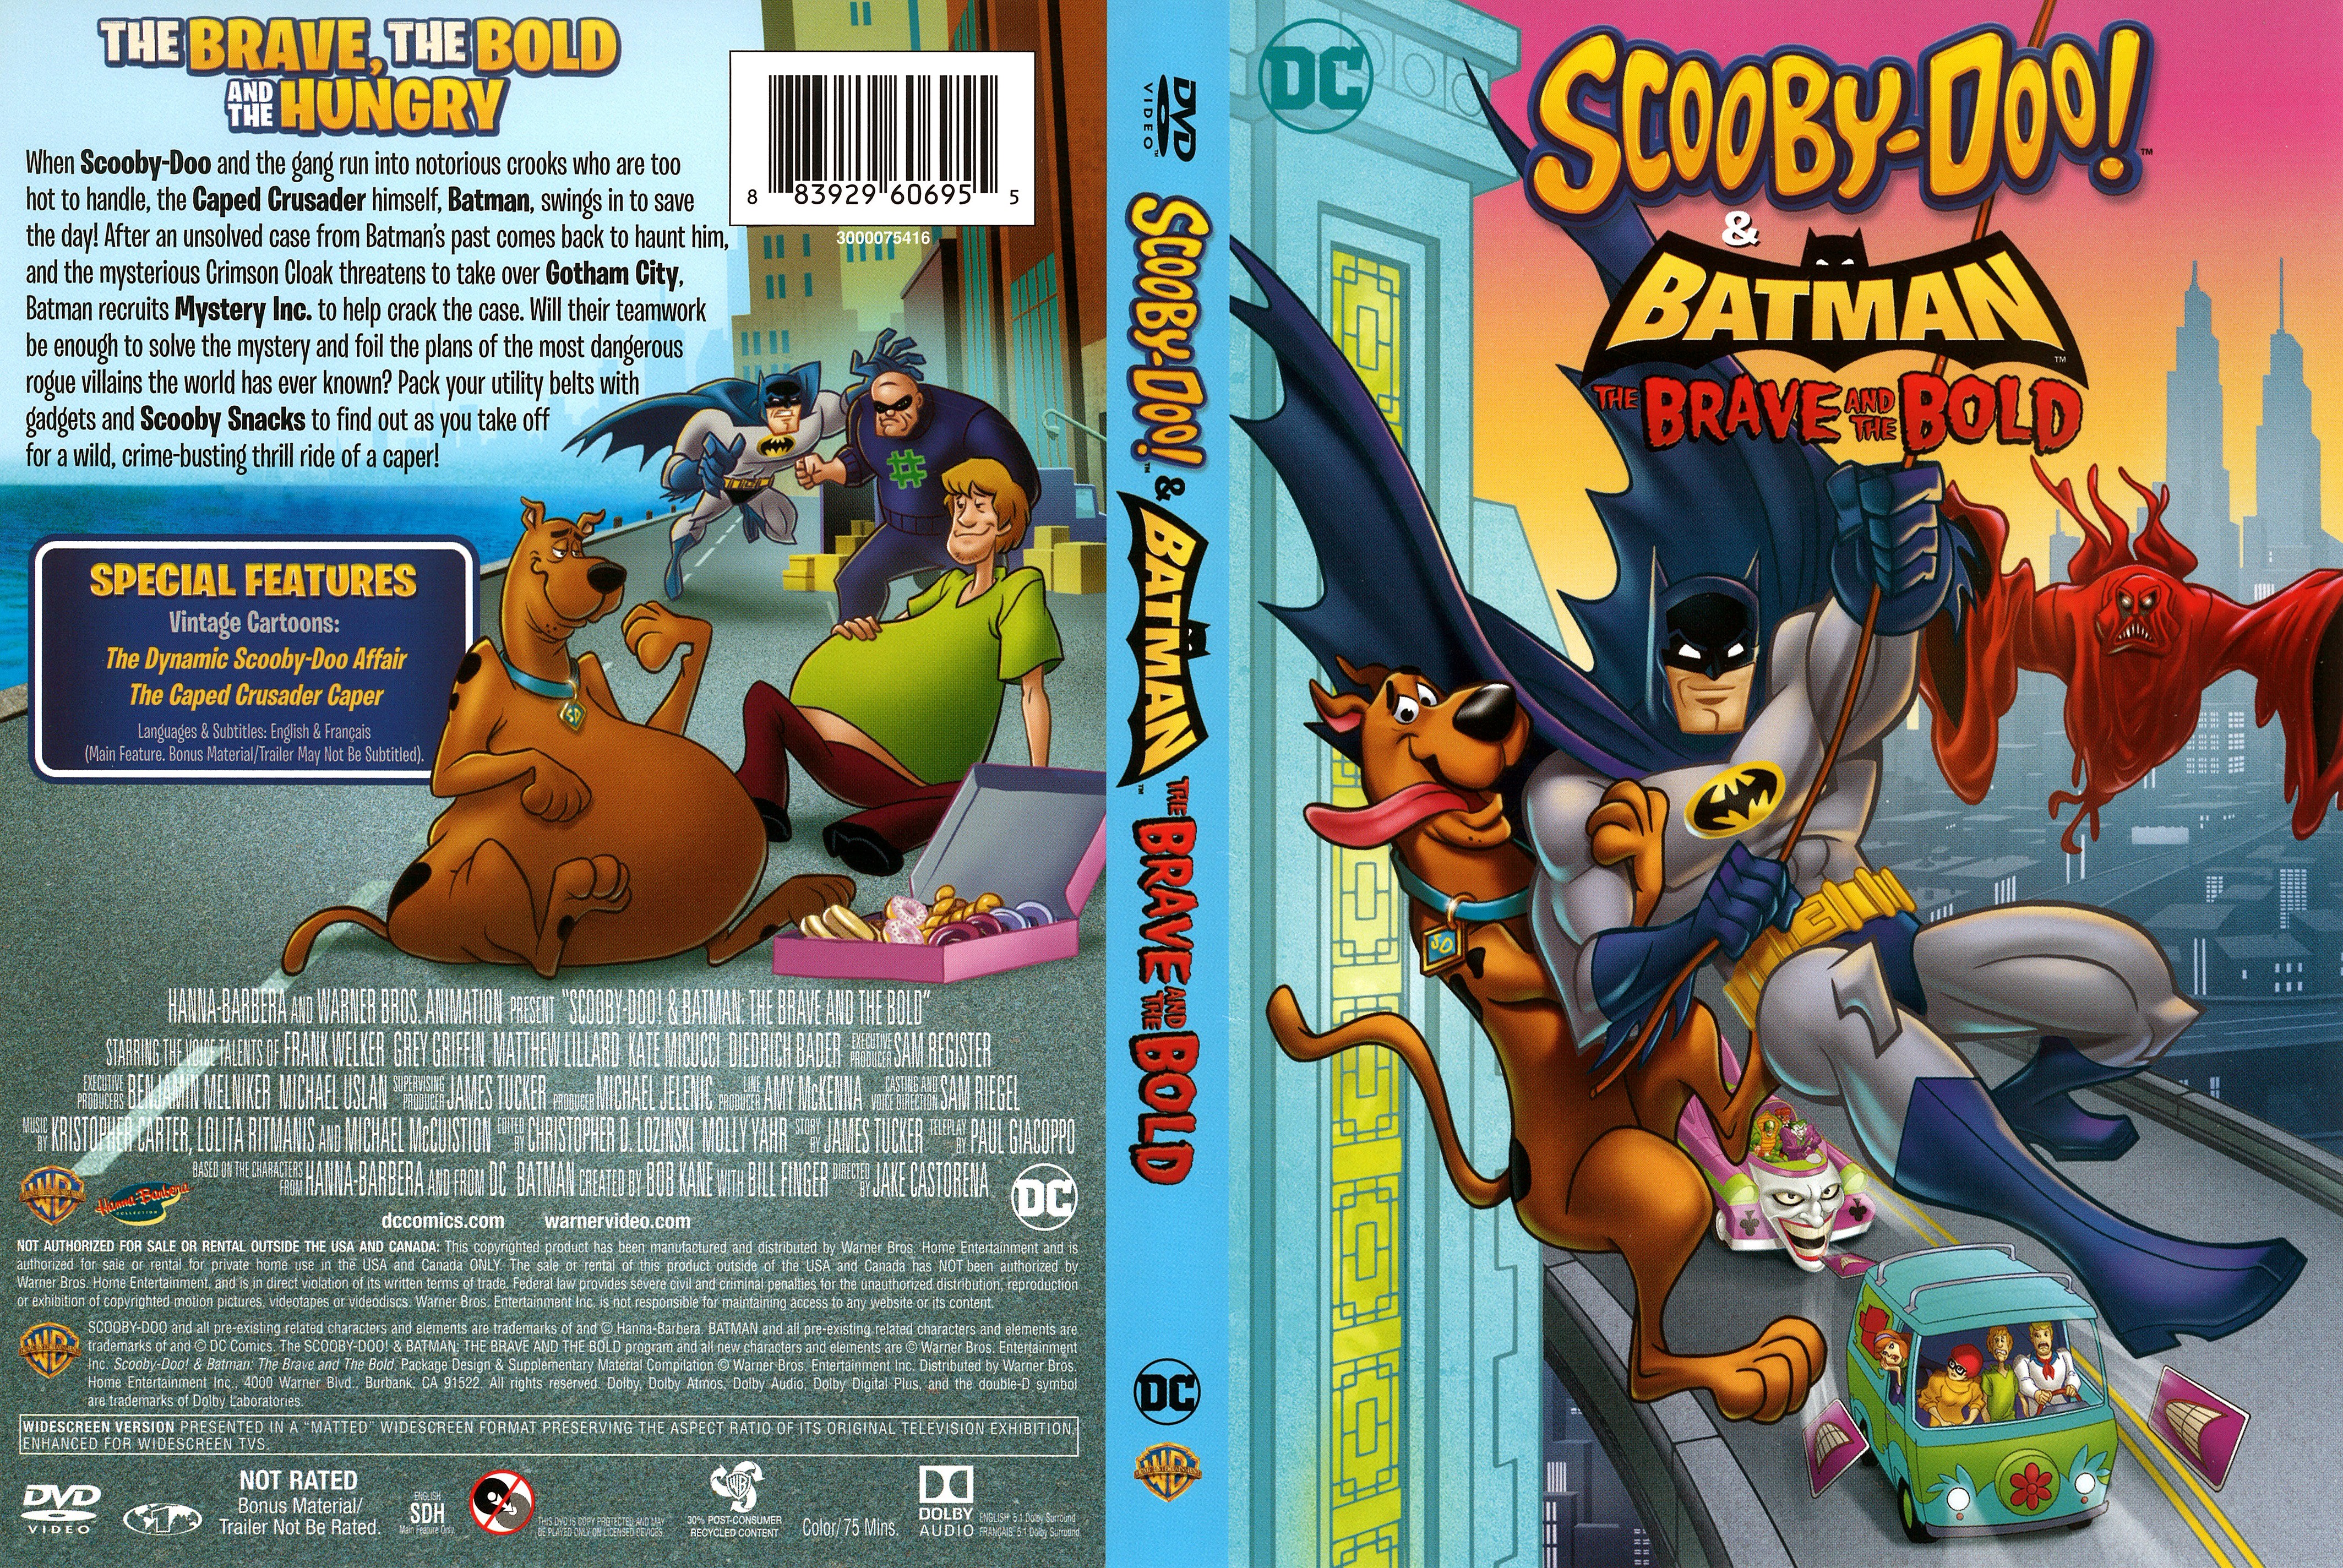 Scooby-Doo! & Batman: The Brave and the Bold DVD Cover 